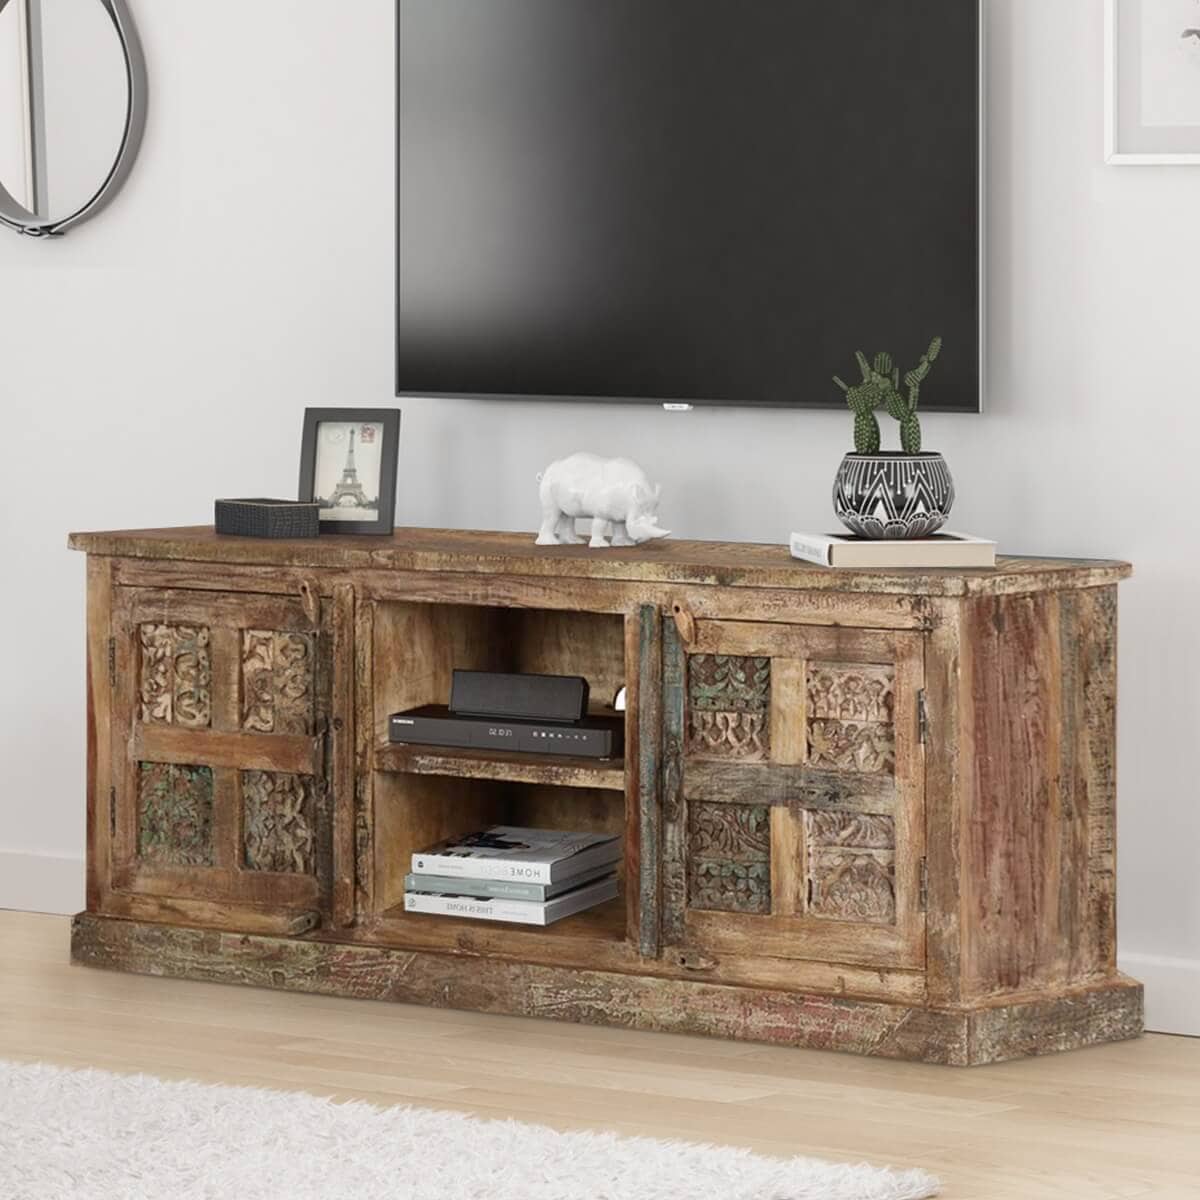 reclaimed wood tv stand; reclaimed wood furniture ideas